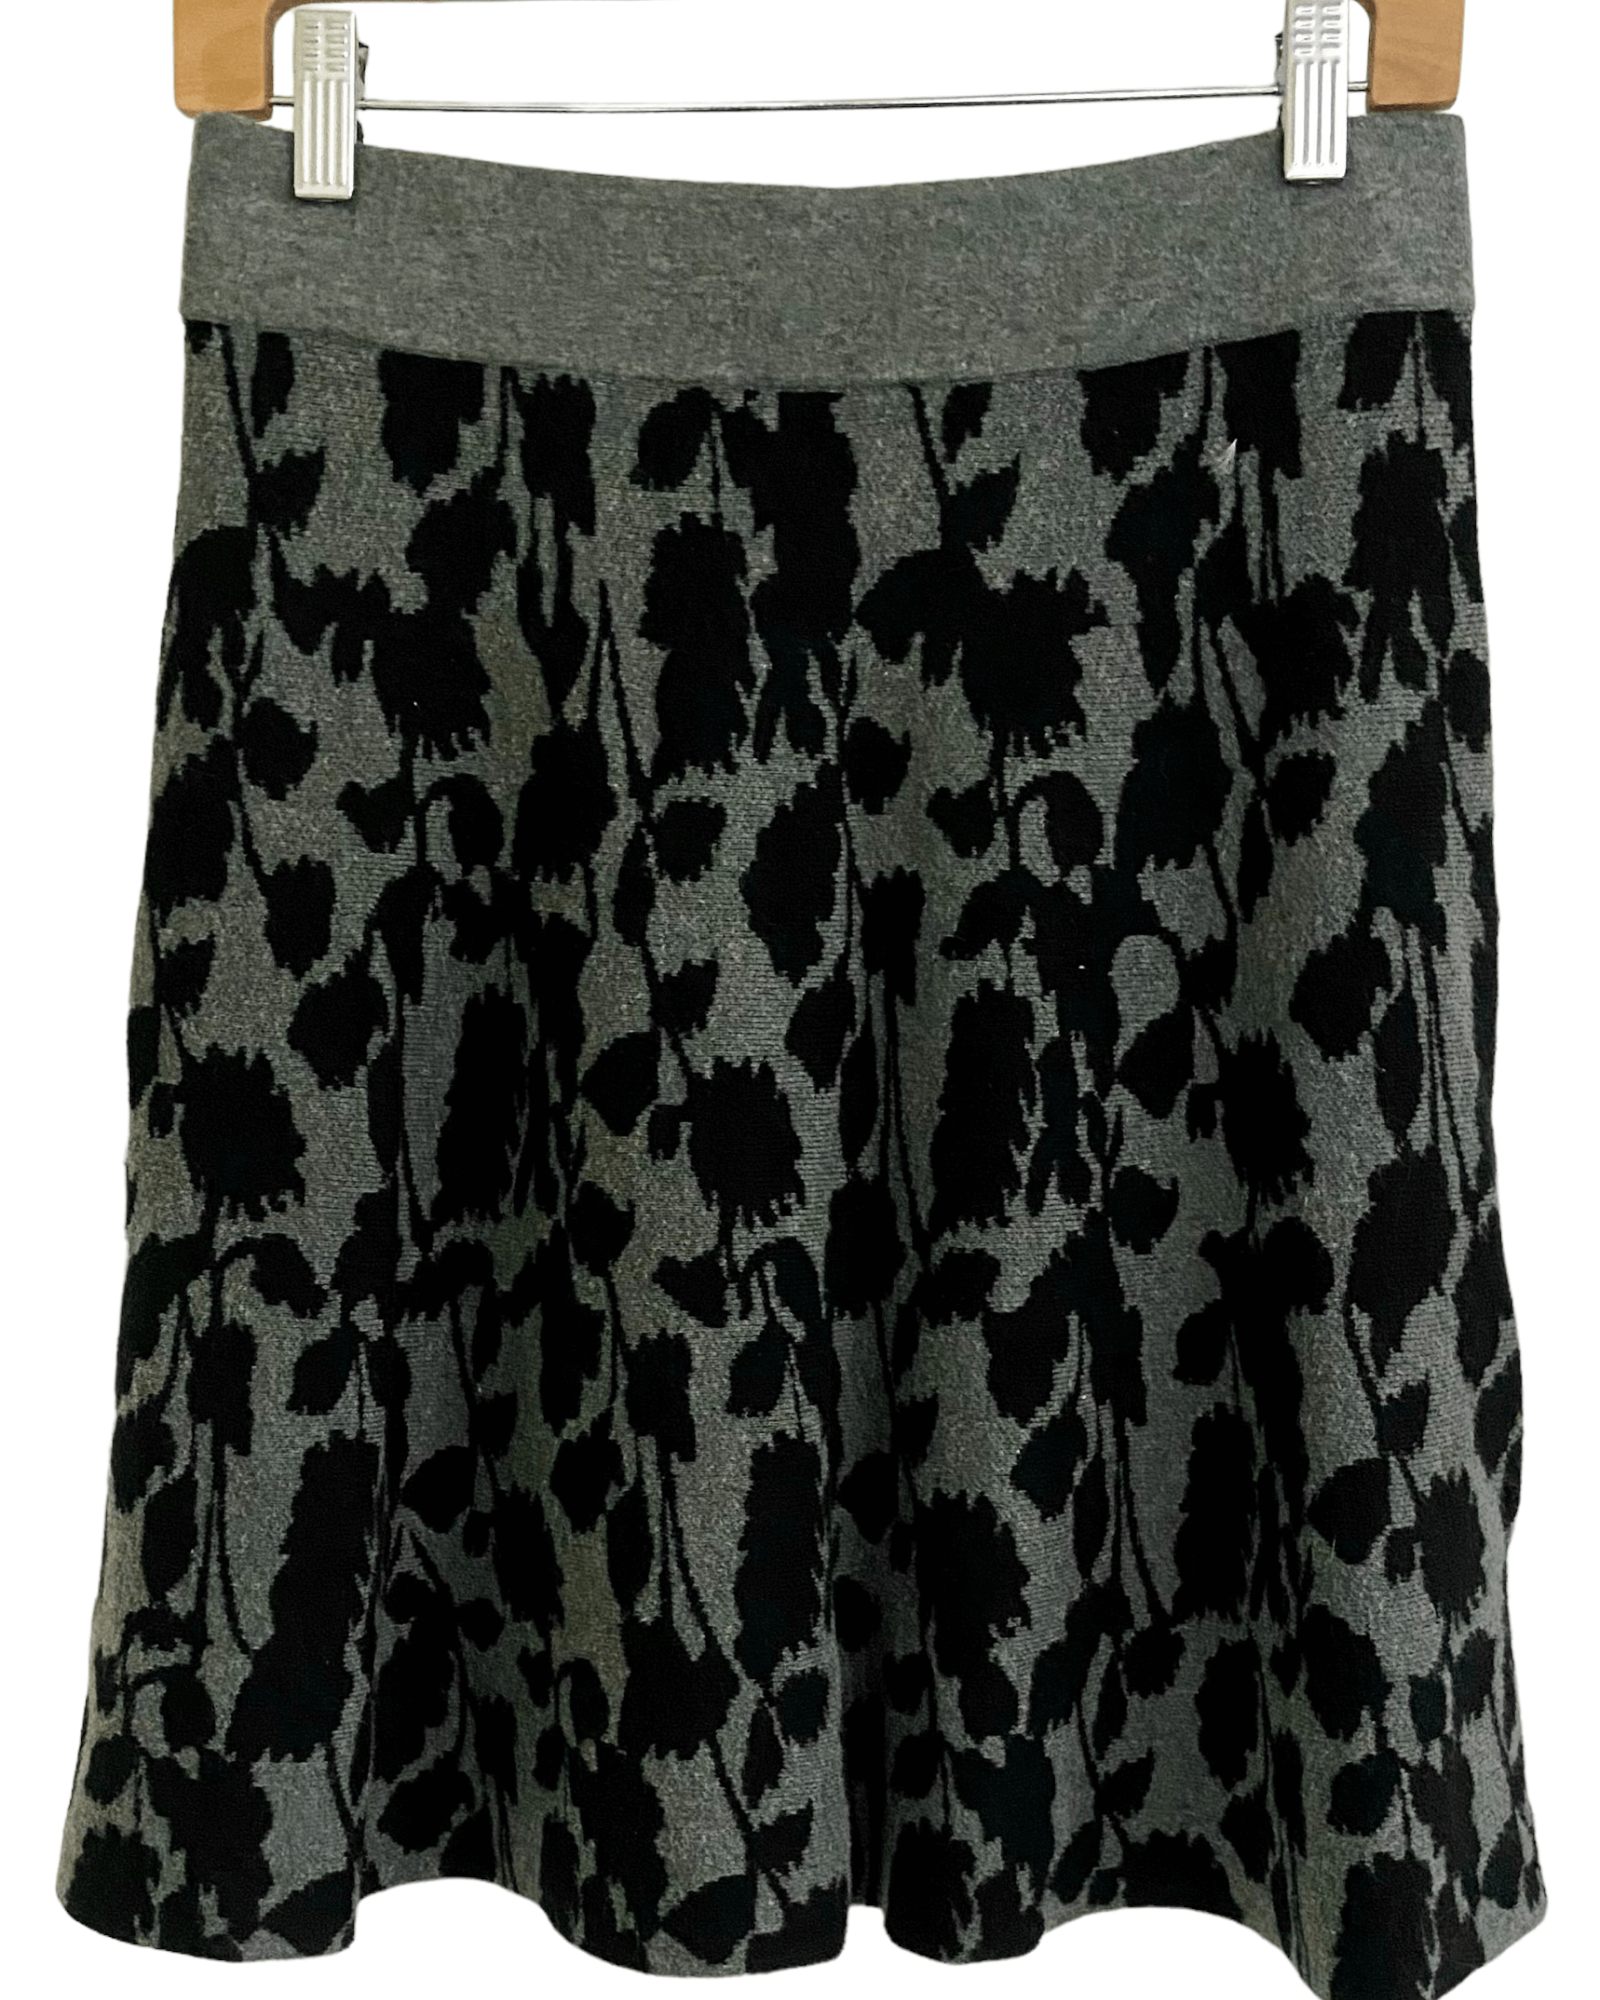 Dark Winter ANN TAYLOR black and gray floral knit skirt